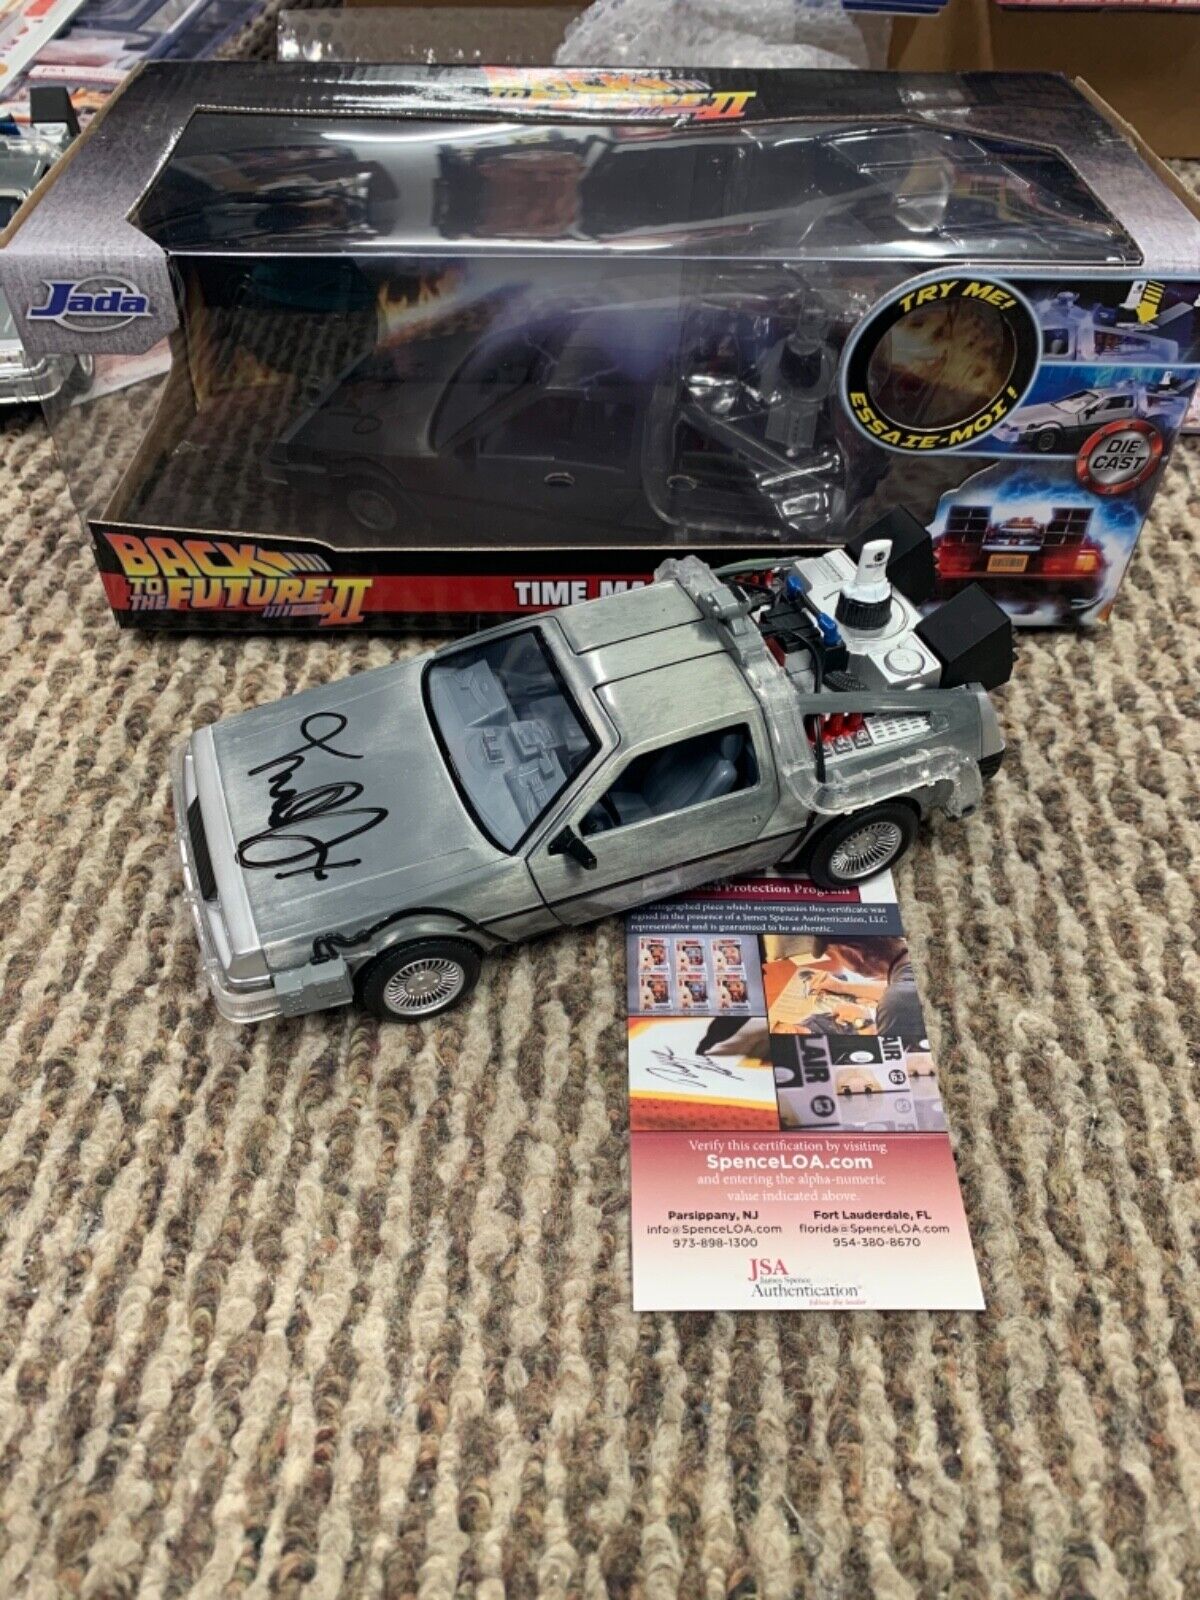 Back To the Future 1/24 Diecast sign Michael J Fox Marty McFly JSA Time Machine